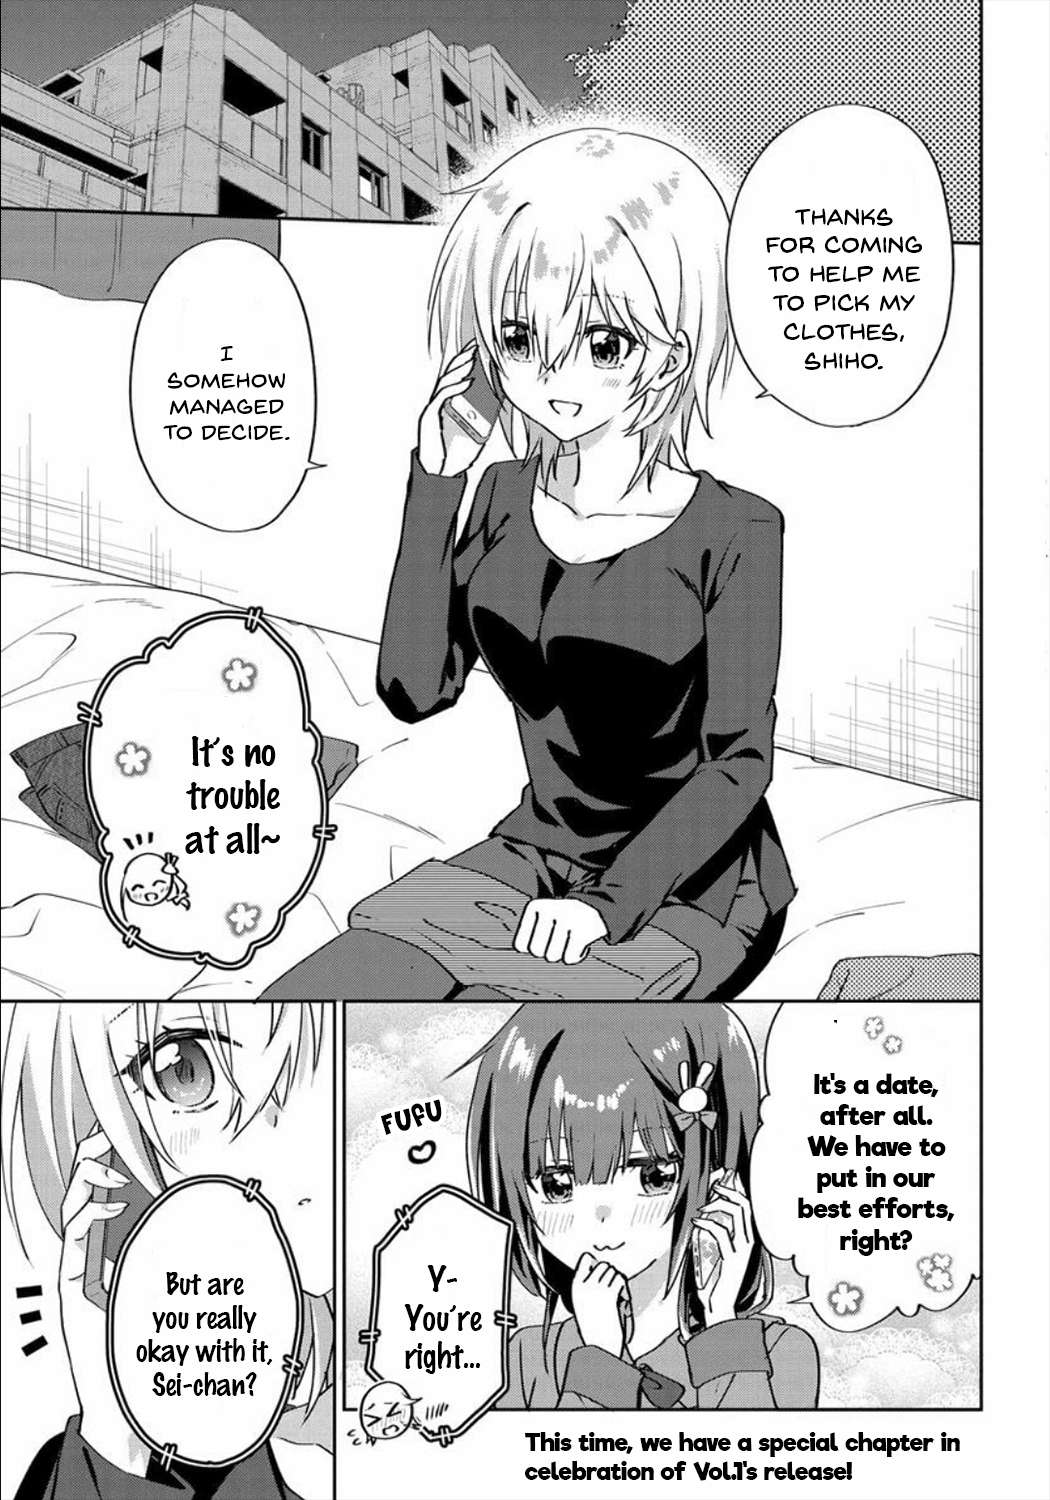 Since I’Ve Entered The World Of Romantic Comedy Manga, I’Ll Do My Best To Make The Losing Heroine Happy - chapter 6.6 - #1